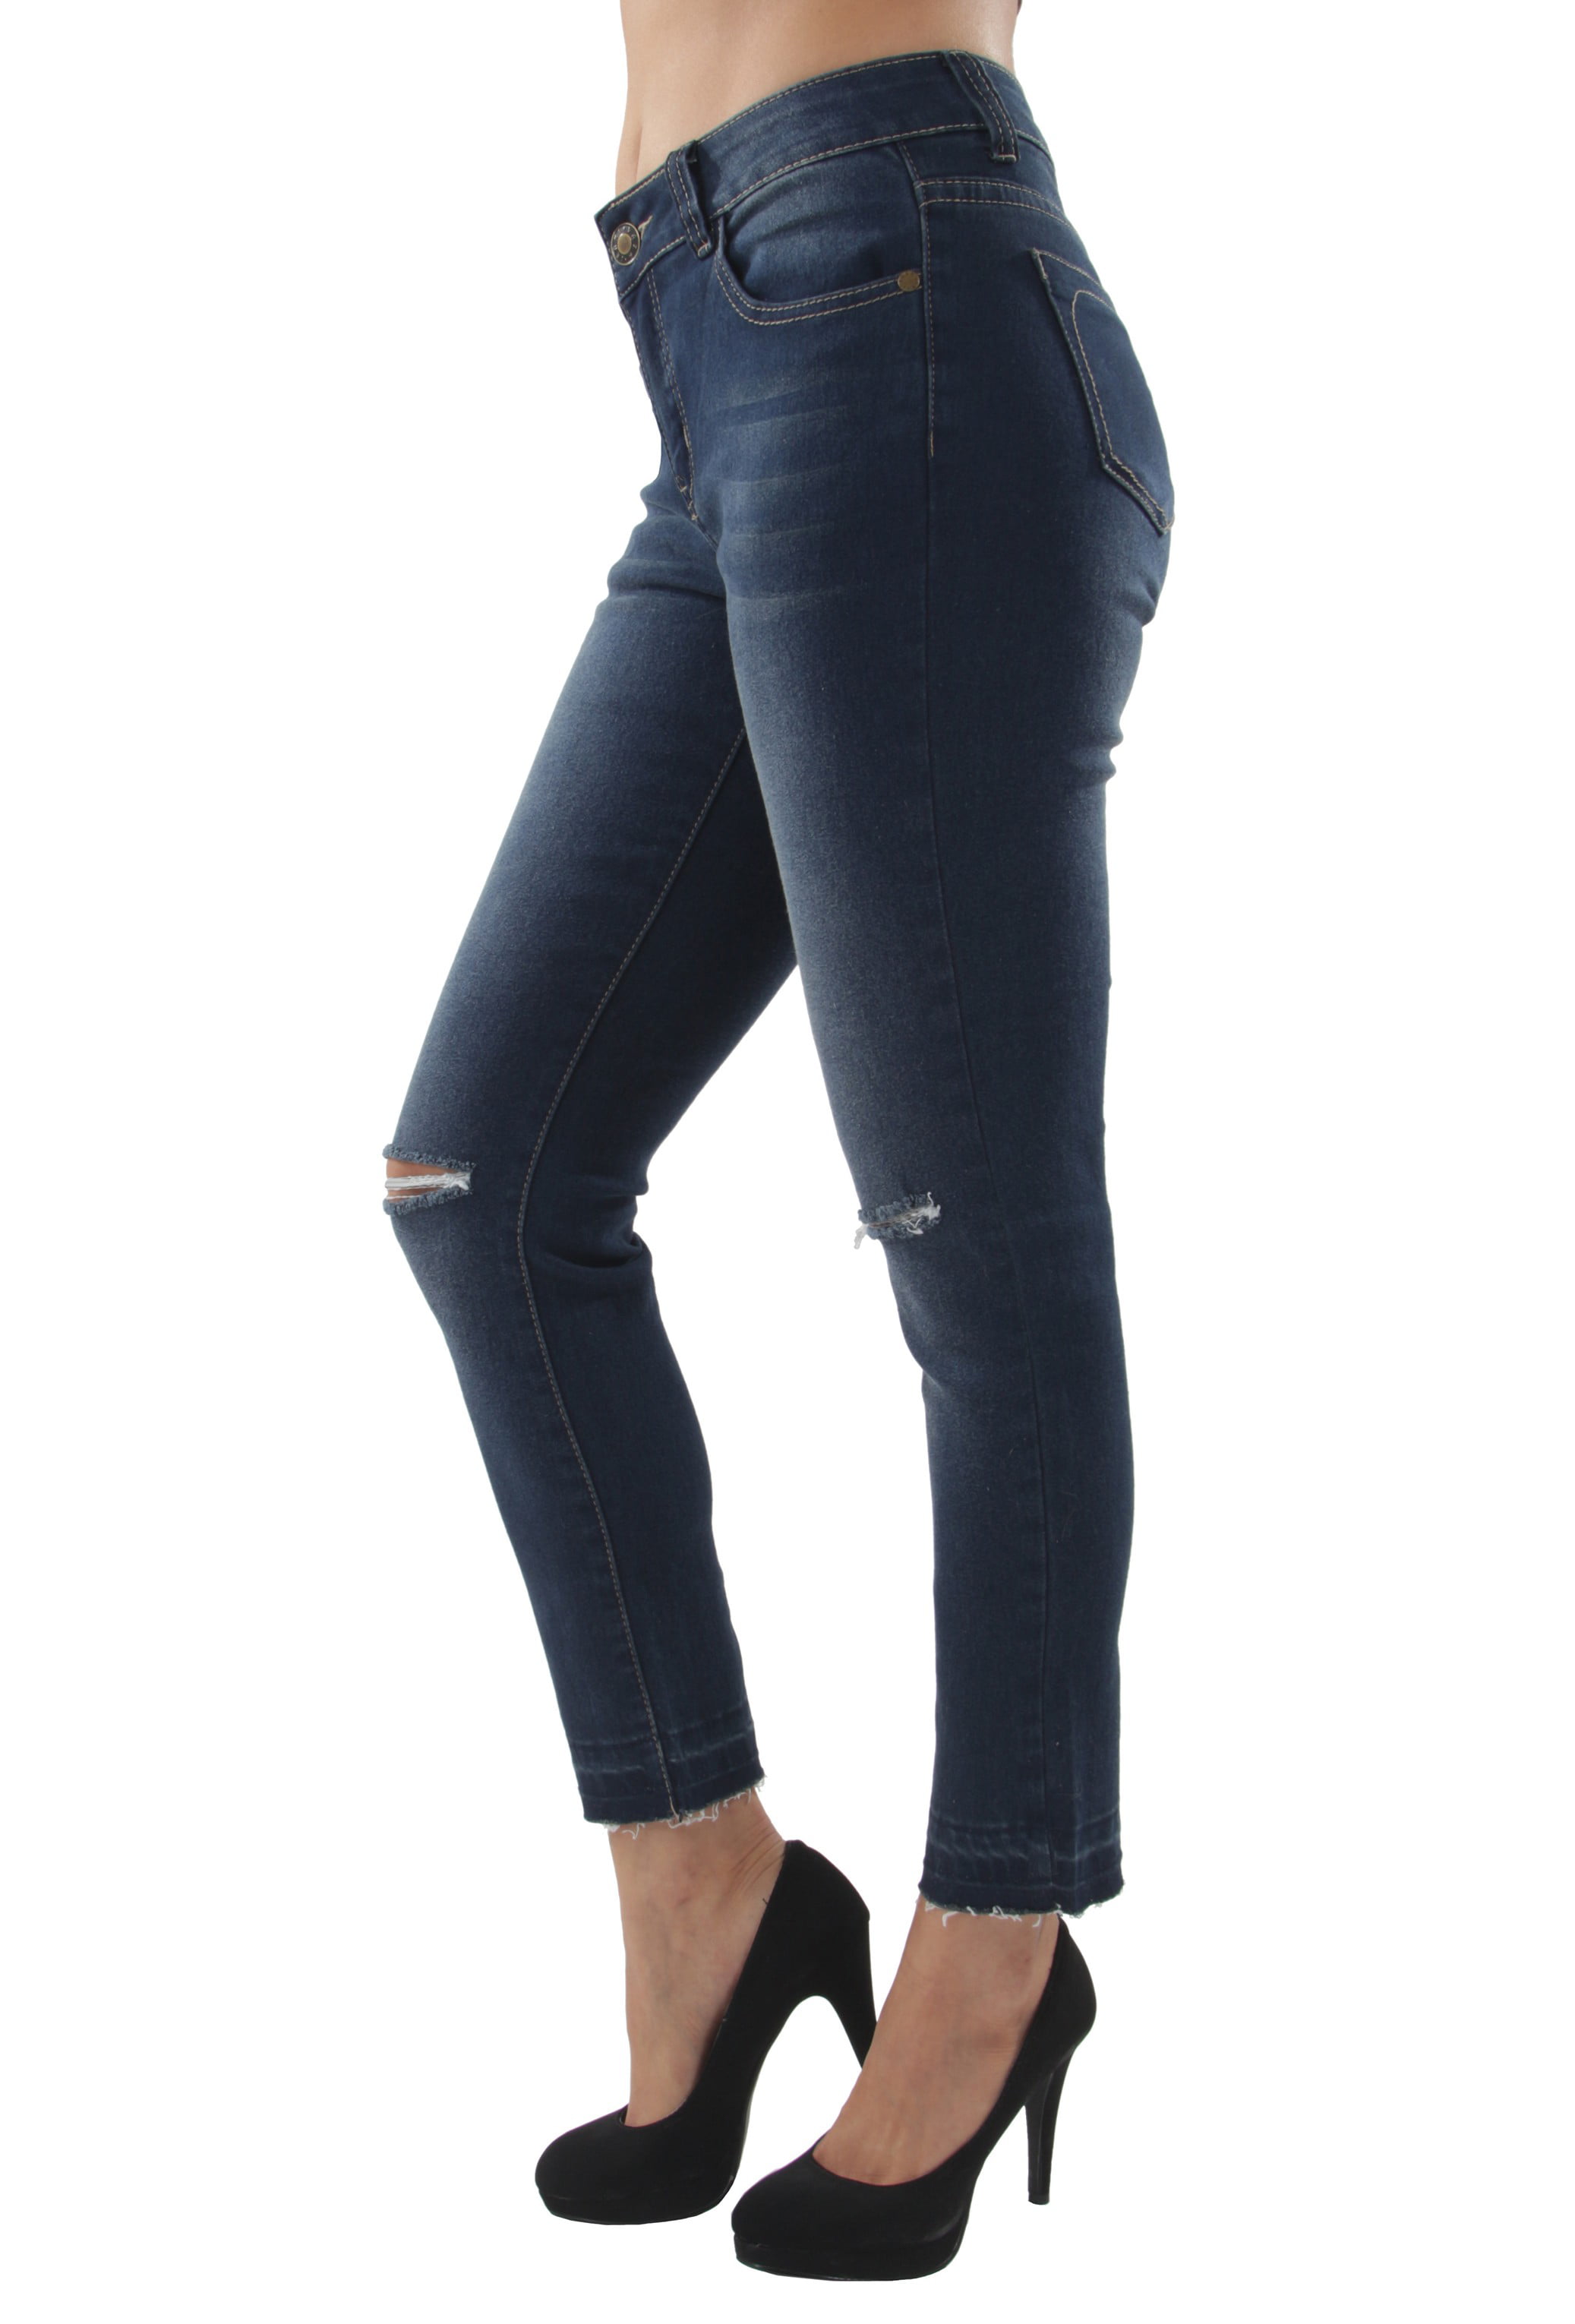 Ripped Ankle Length Jeans Classic Premium Denim Destroyed Women's Jeans ...